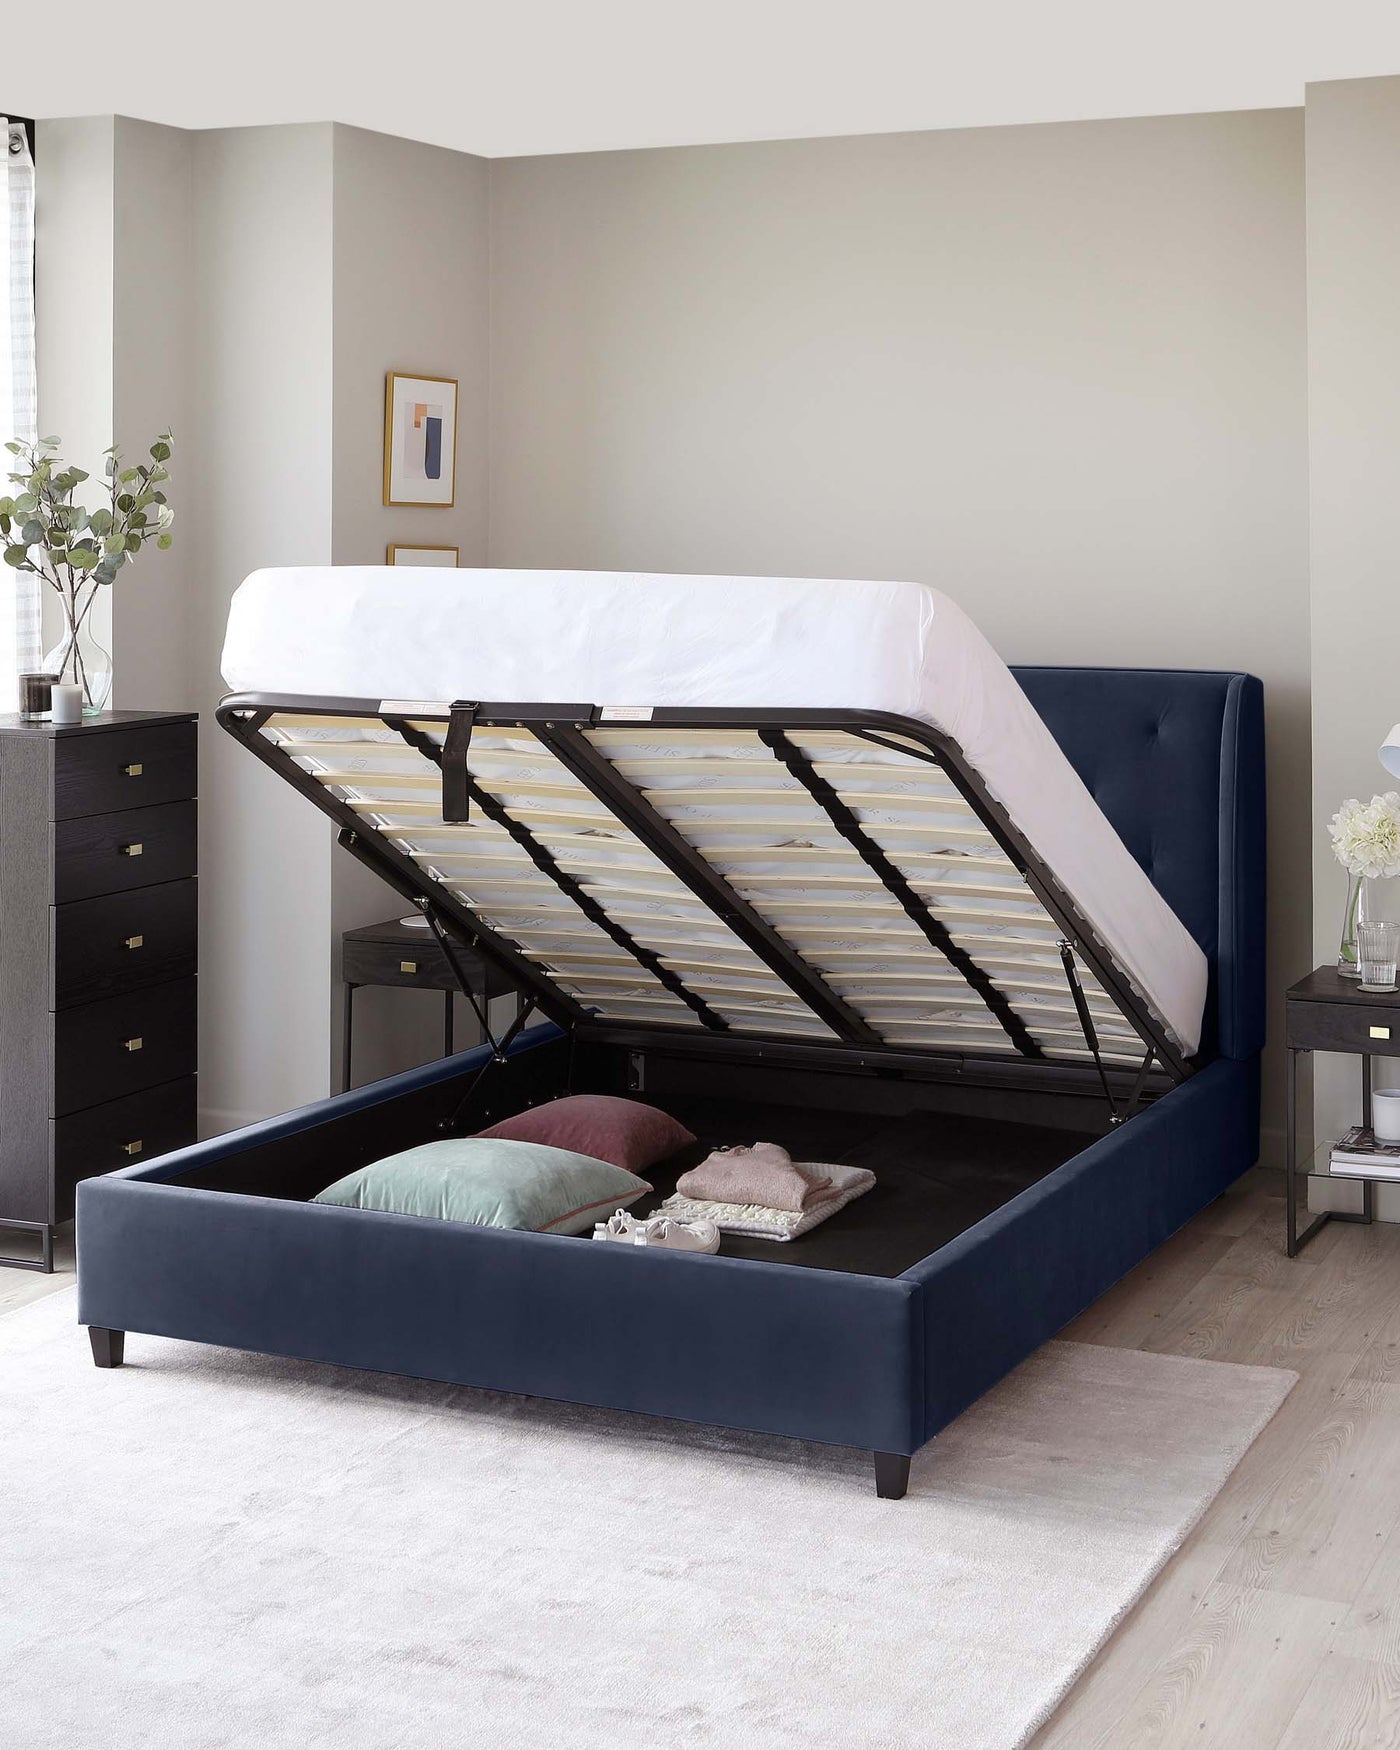 A contemporary navy upholstered storage bed with a lifted mattress base revealing a spacious storage area underneath. The bed features a sleek design with a tall, padded headboard and dark wooden legs. A matching navy bedside table with drawers and silver handles is present to the right of the bed, atop which sits a vase with white flowers. A dark-toned chest of drawers stands on the opposite side. All pieces are set against a neutral-toned room with light carpeting.